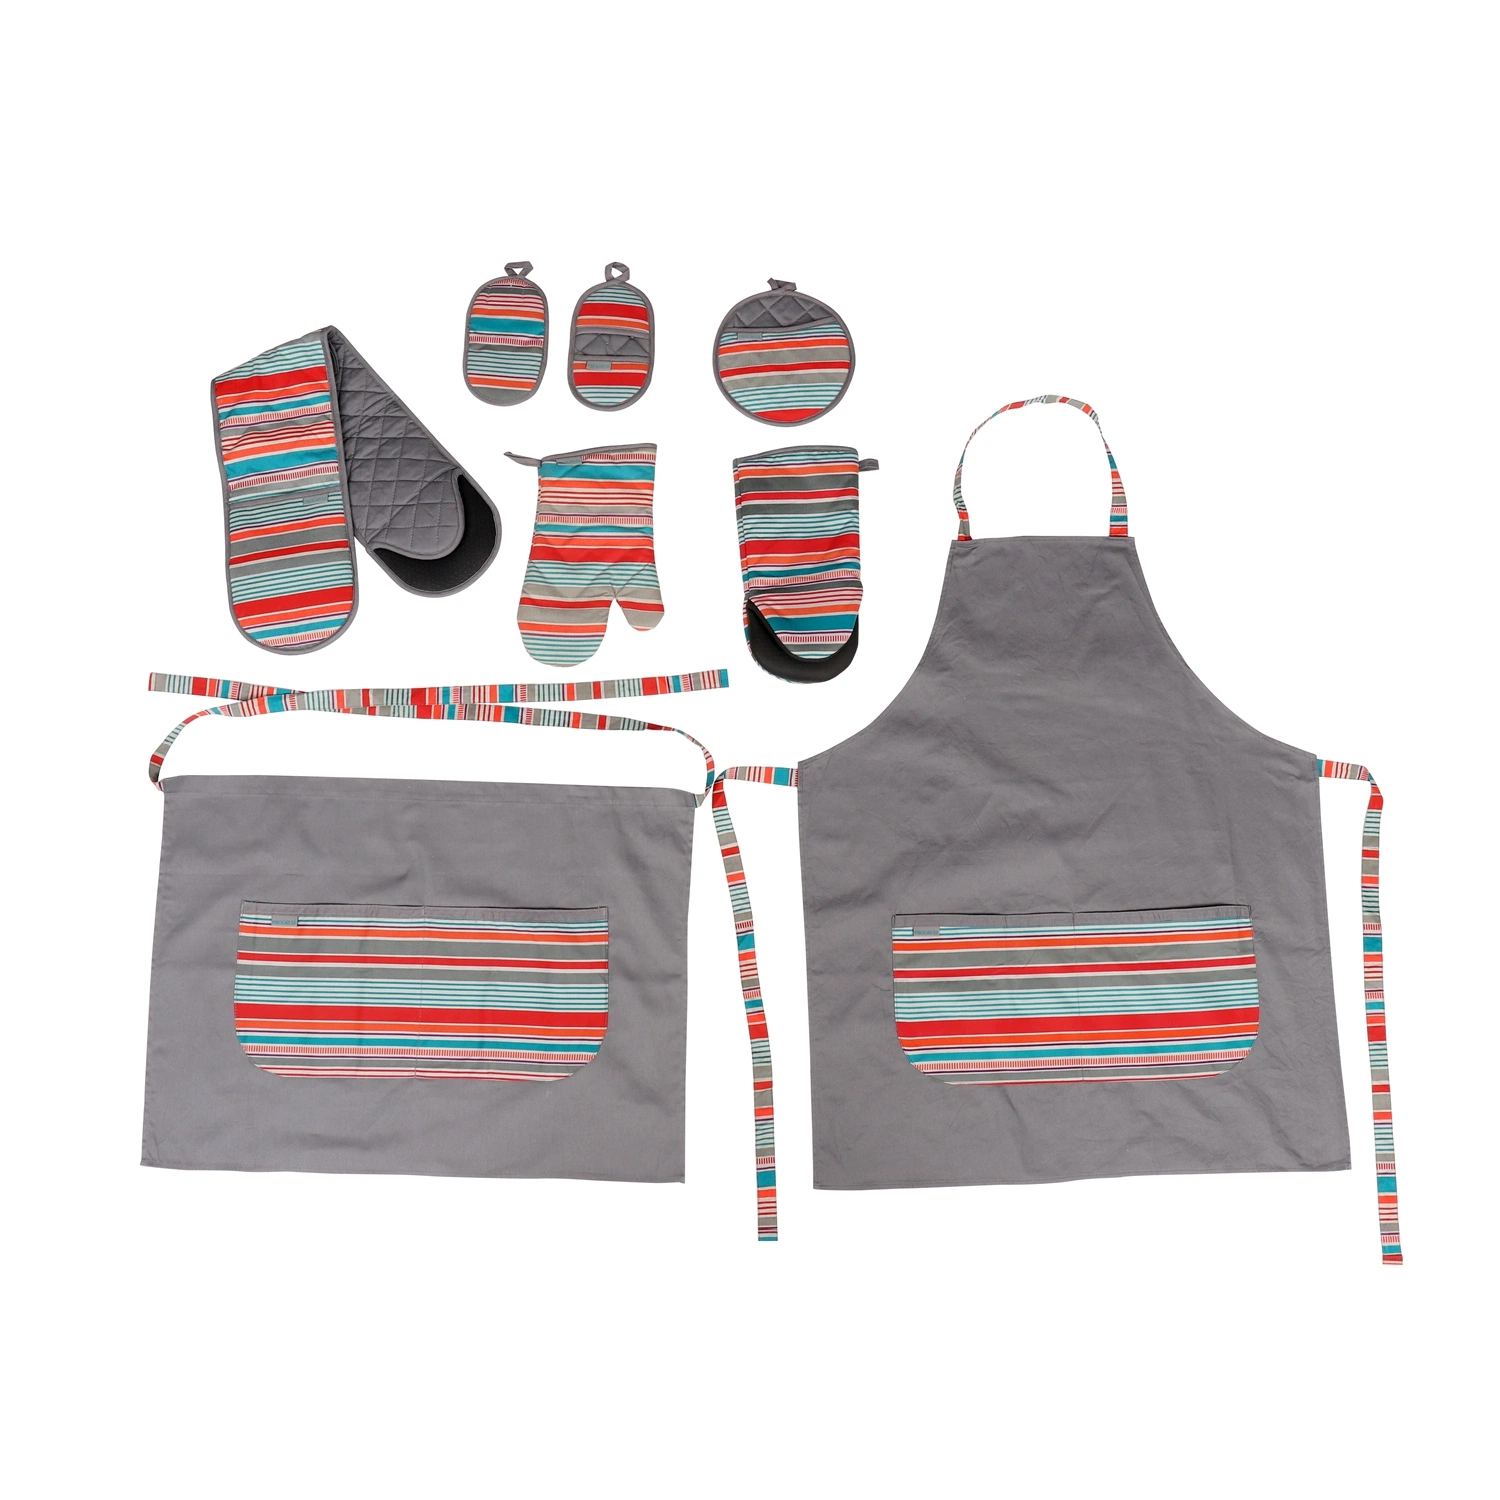 Oven Mitts and Pot Holders with Chef Apron, Set 5 Heat Resistant Kitchen Gloves and Non-Slip Potholders Adjustable Neck Buckle Chef Apron, Cotton Nice